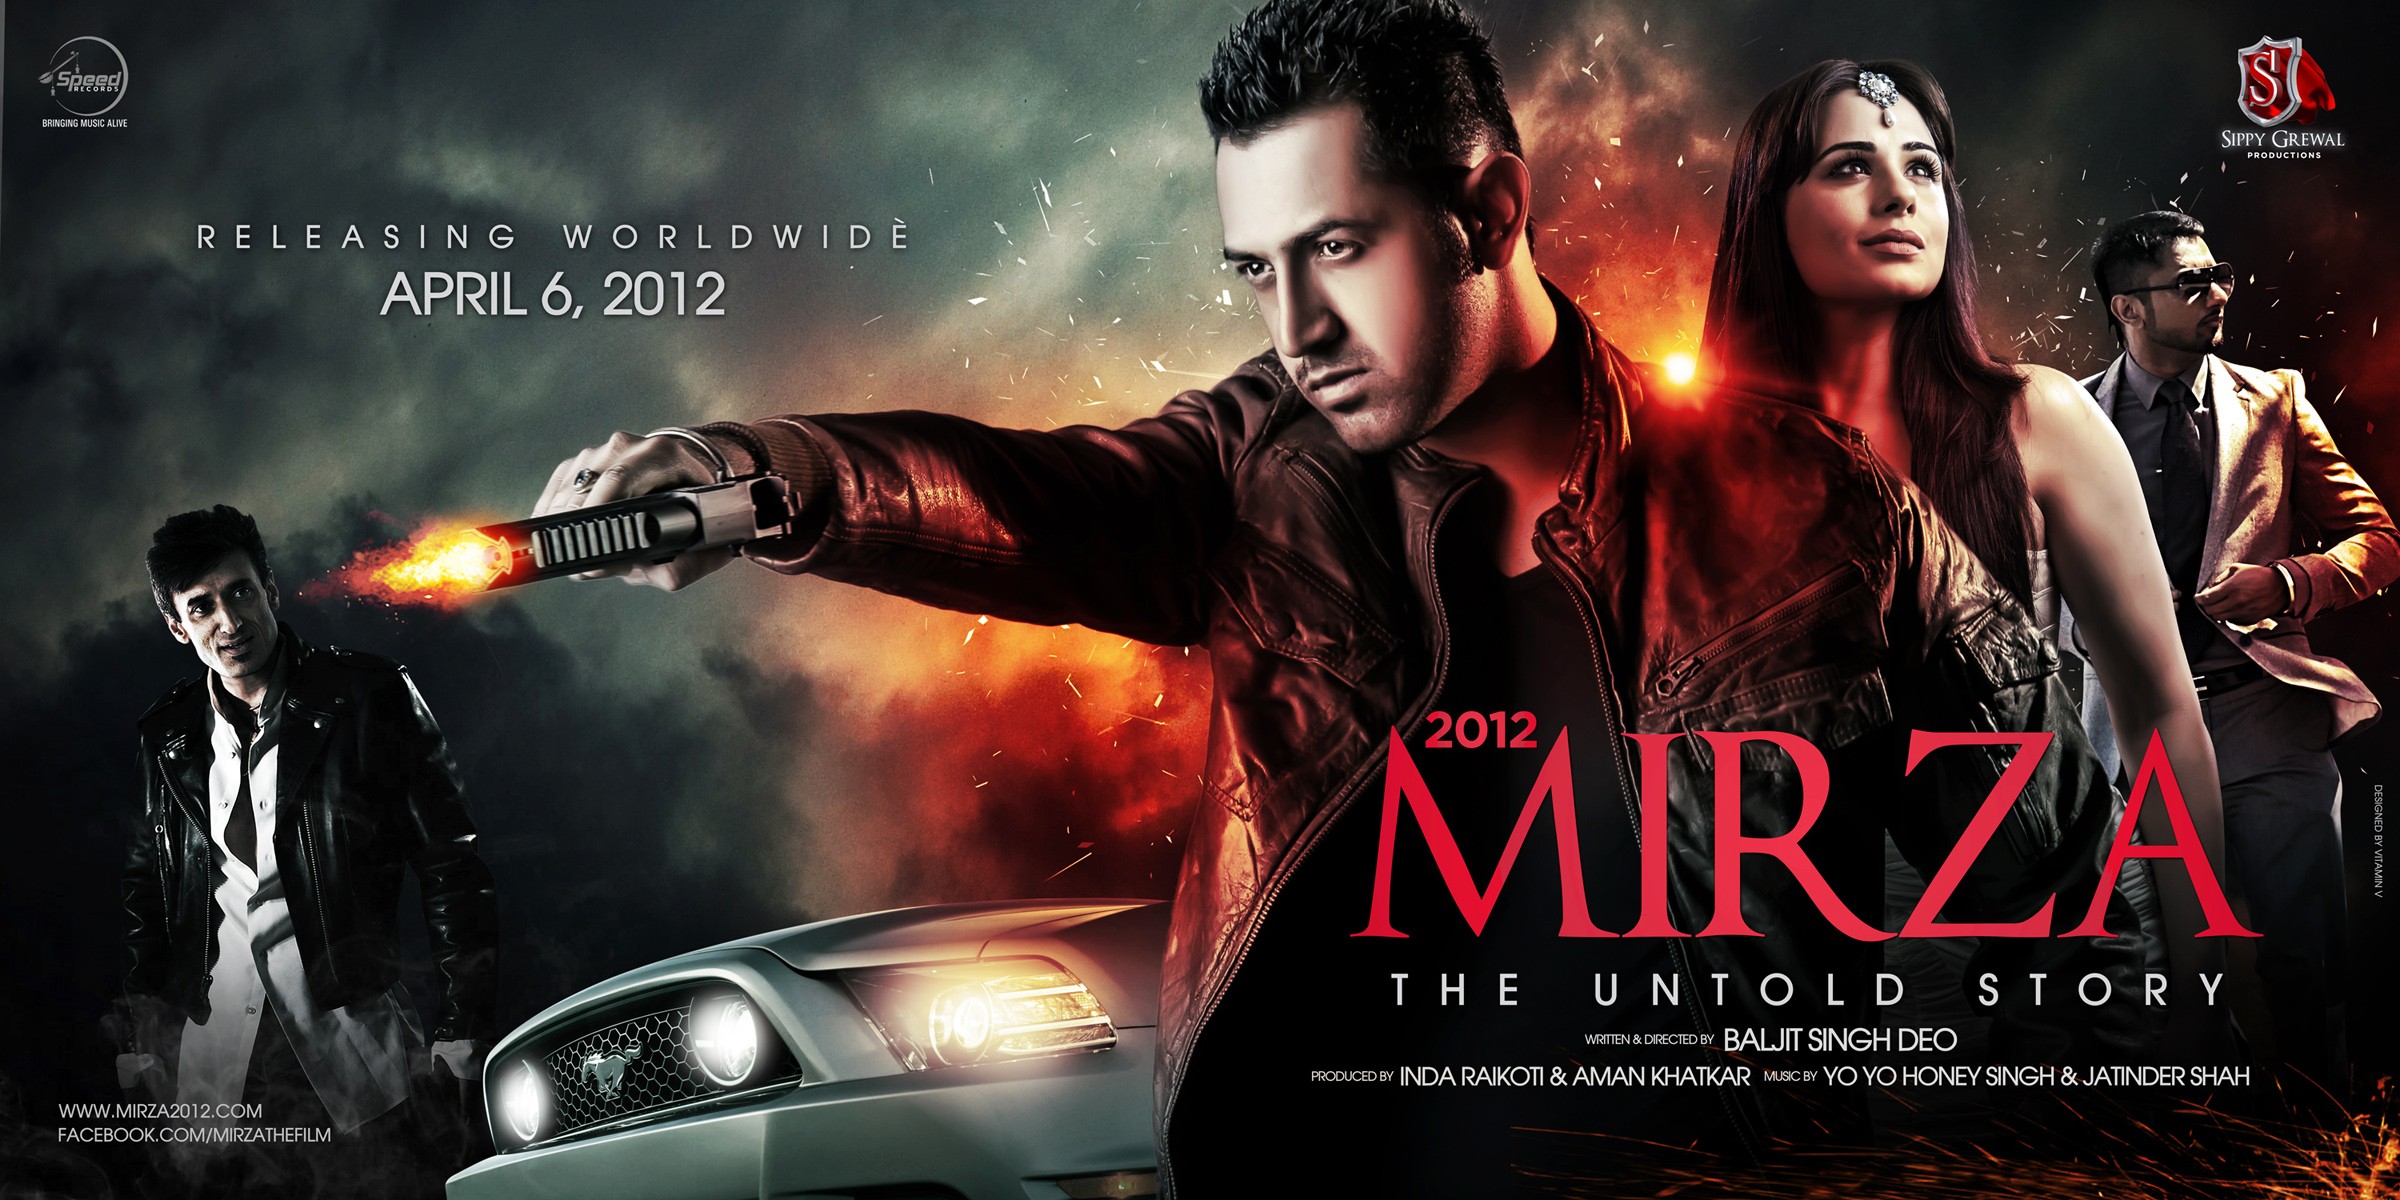 Mega Sized Movie Poster Image for Mirza - The Untold Story (#7 of 7)